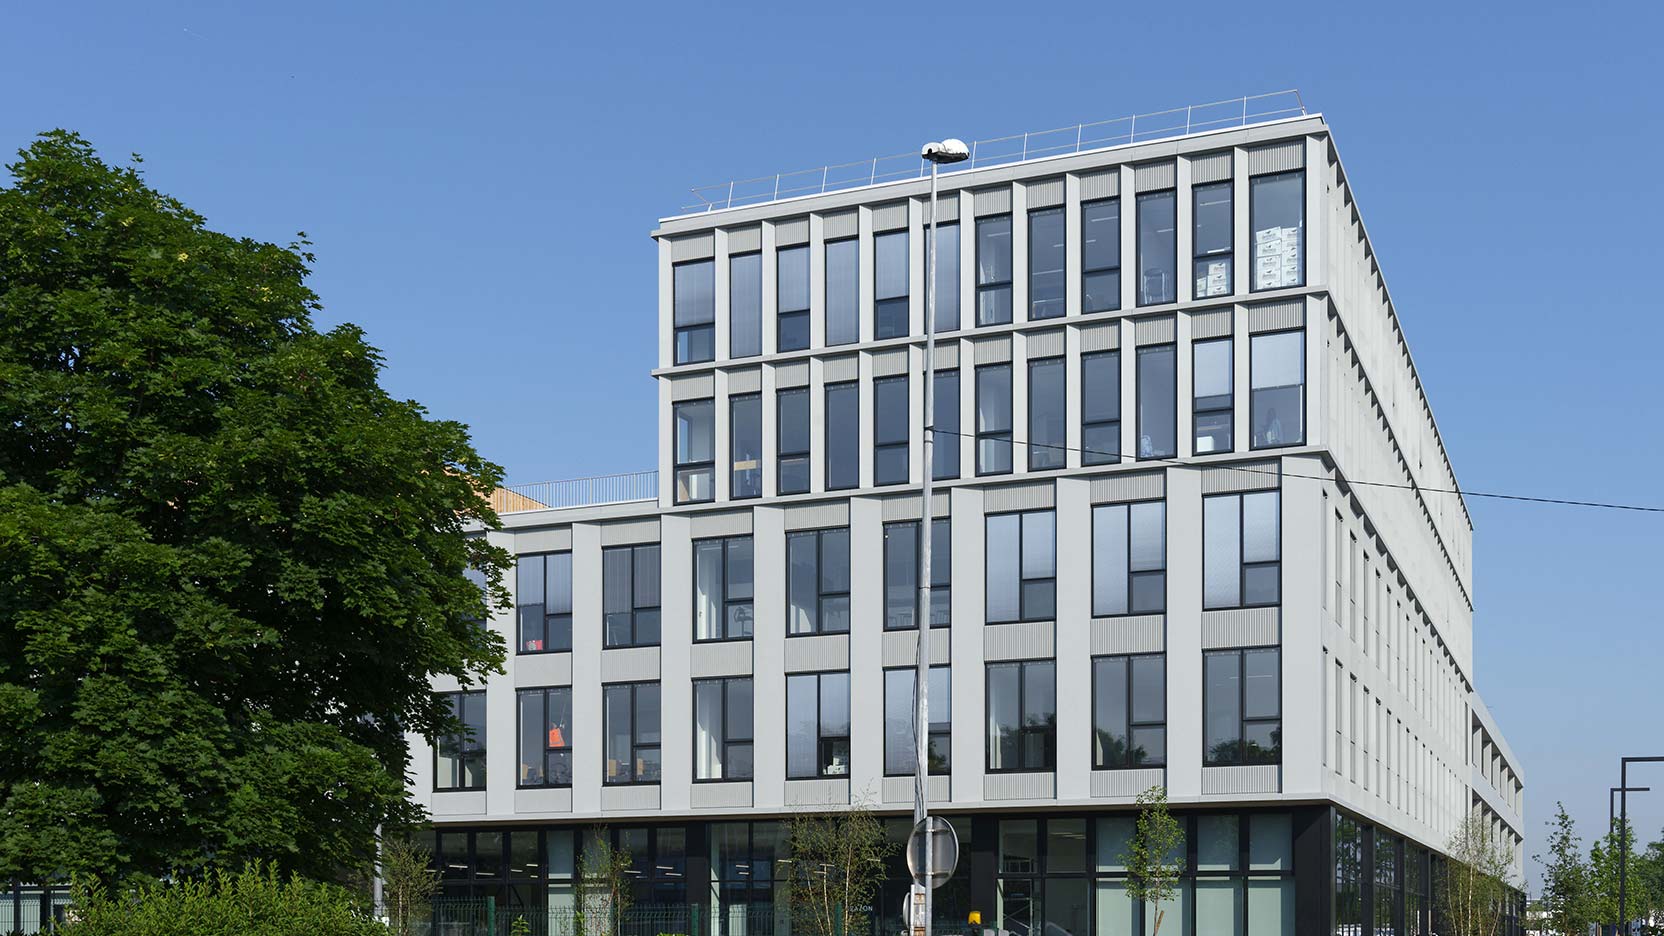 BALAS Group unveils Olympe, its new head office built by GA Smart Building in Gennevilliers, France